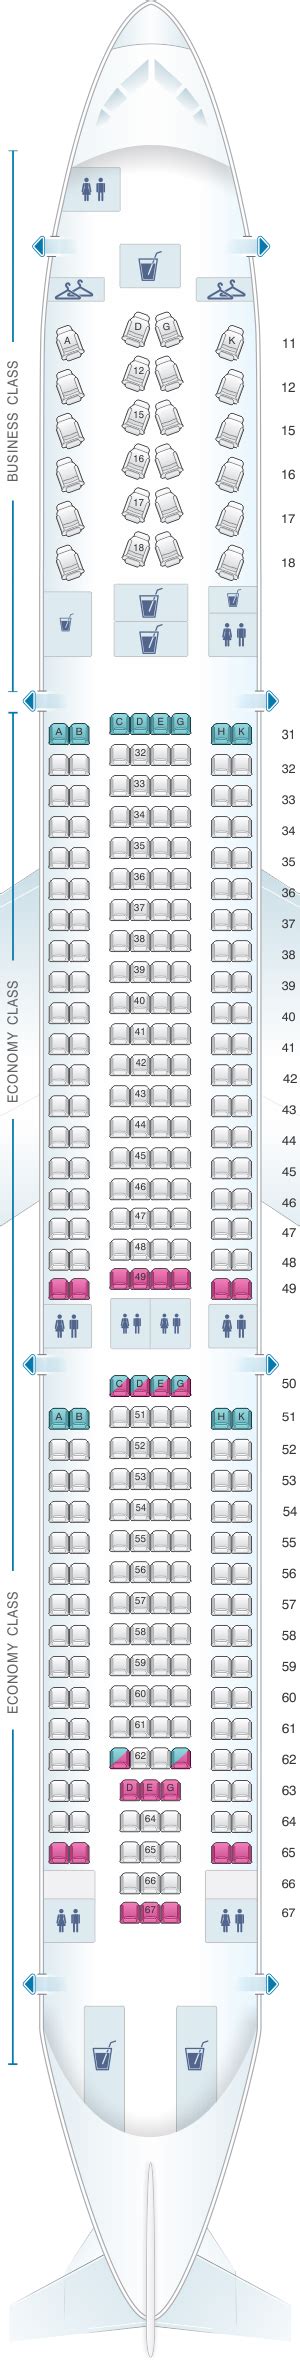 Seat Map Hainan Airlines Airbus A330 300 Config 2 SeatMaestro